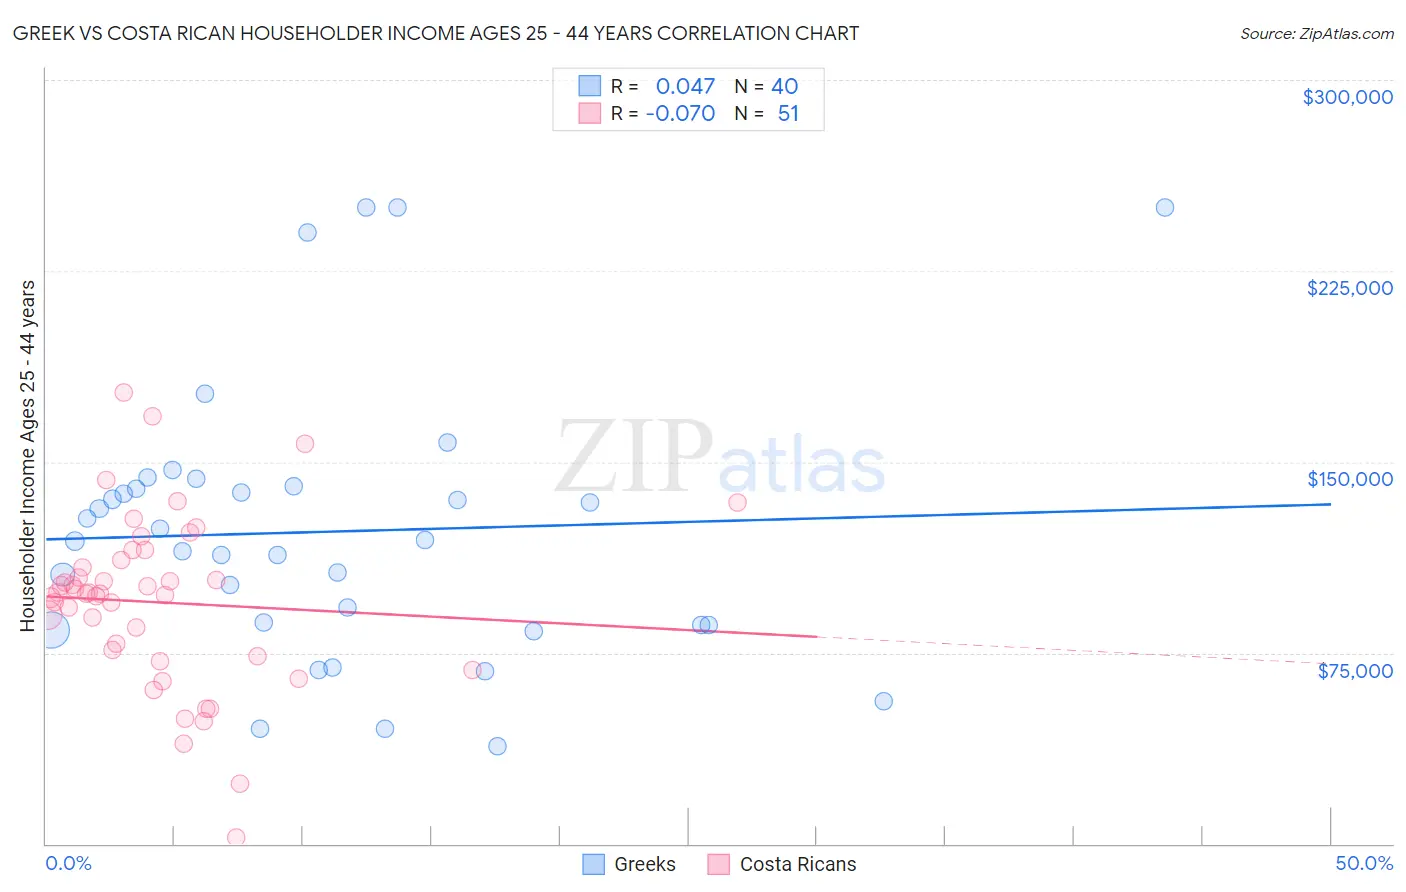 Greek vs Costa Rican Householder Income Ages 25 - 44 years